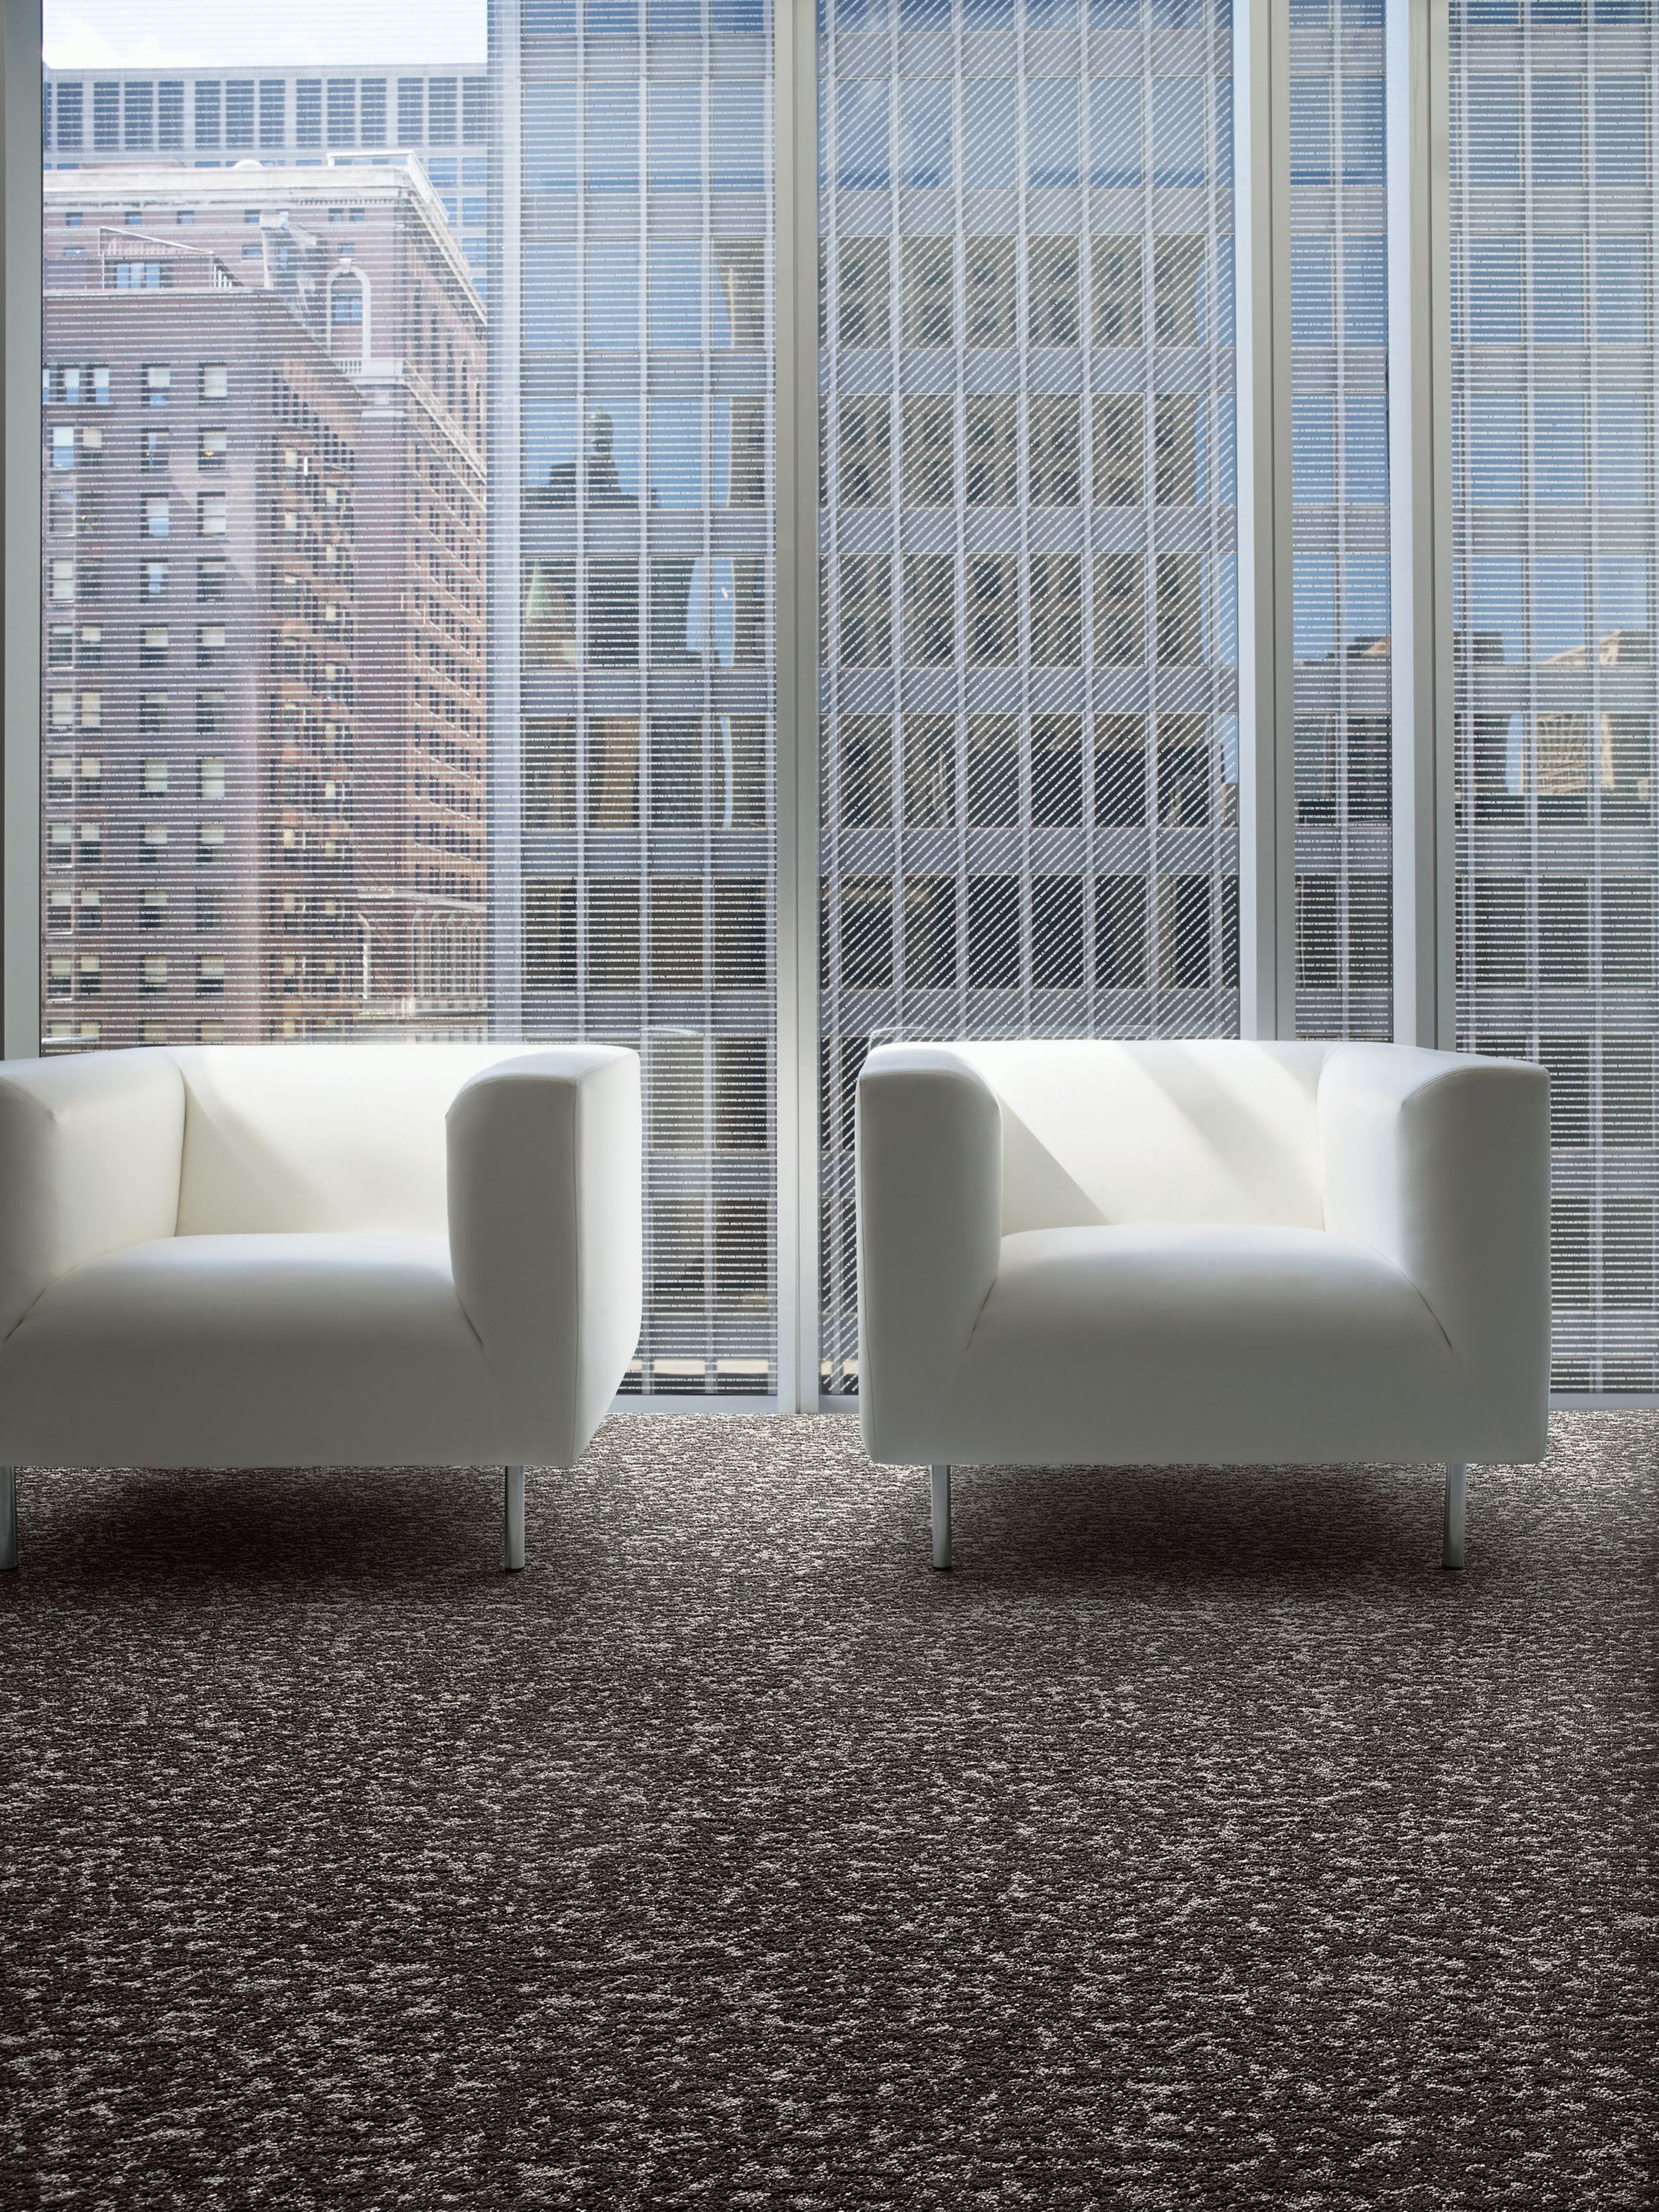 Interface Vessel square carpet tile with chairs in front of window imagen número 1